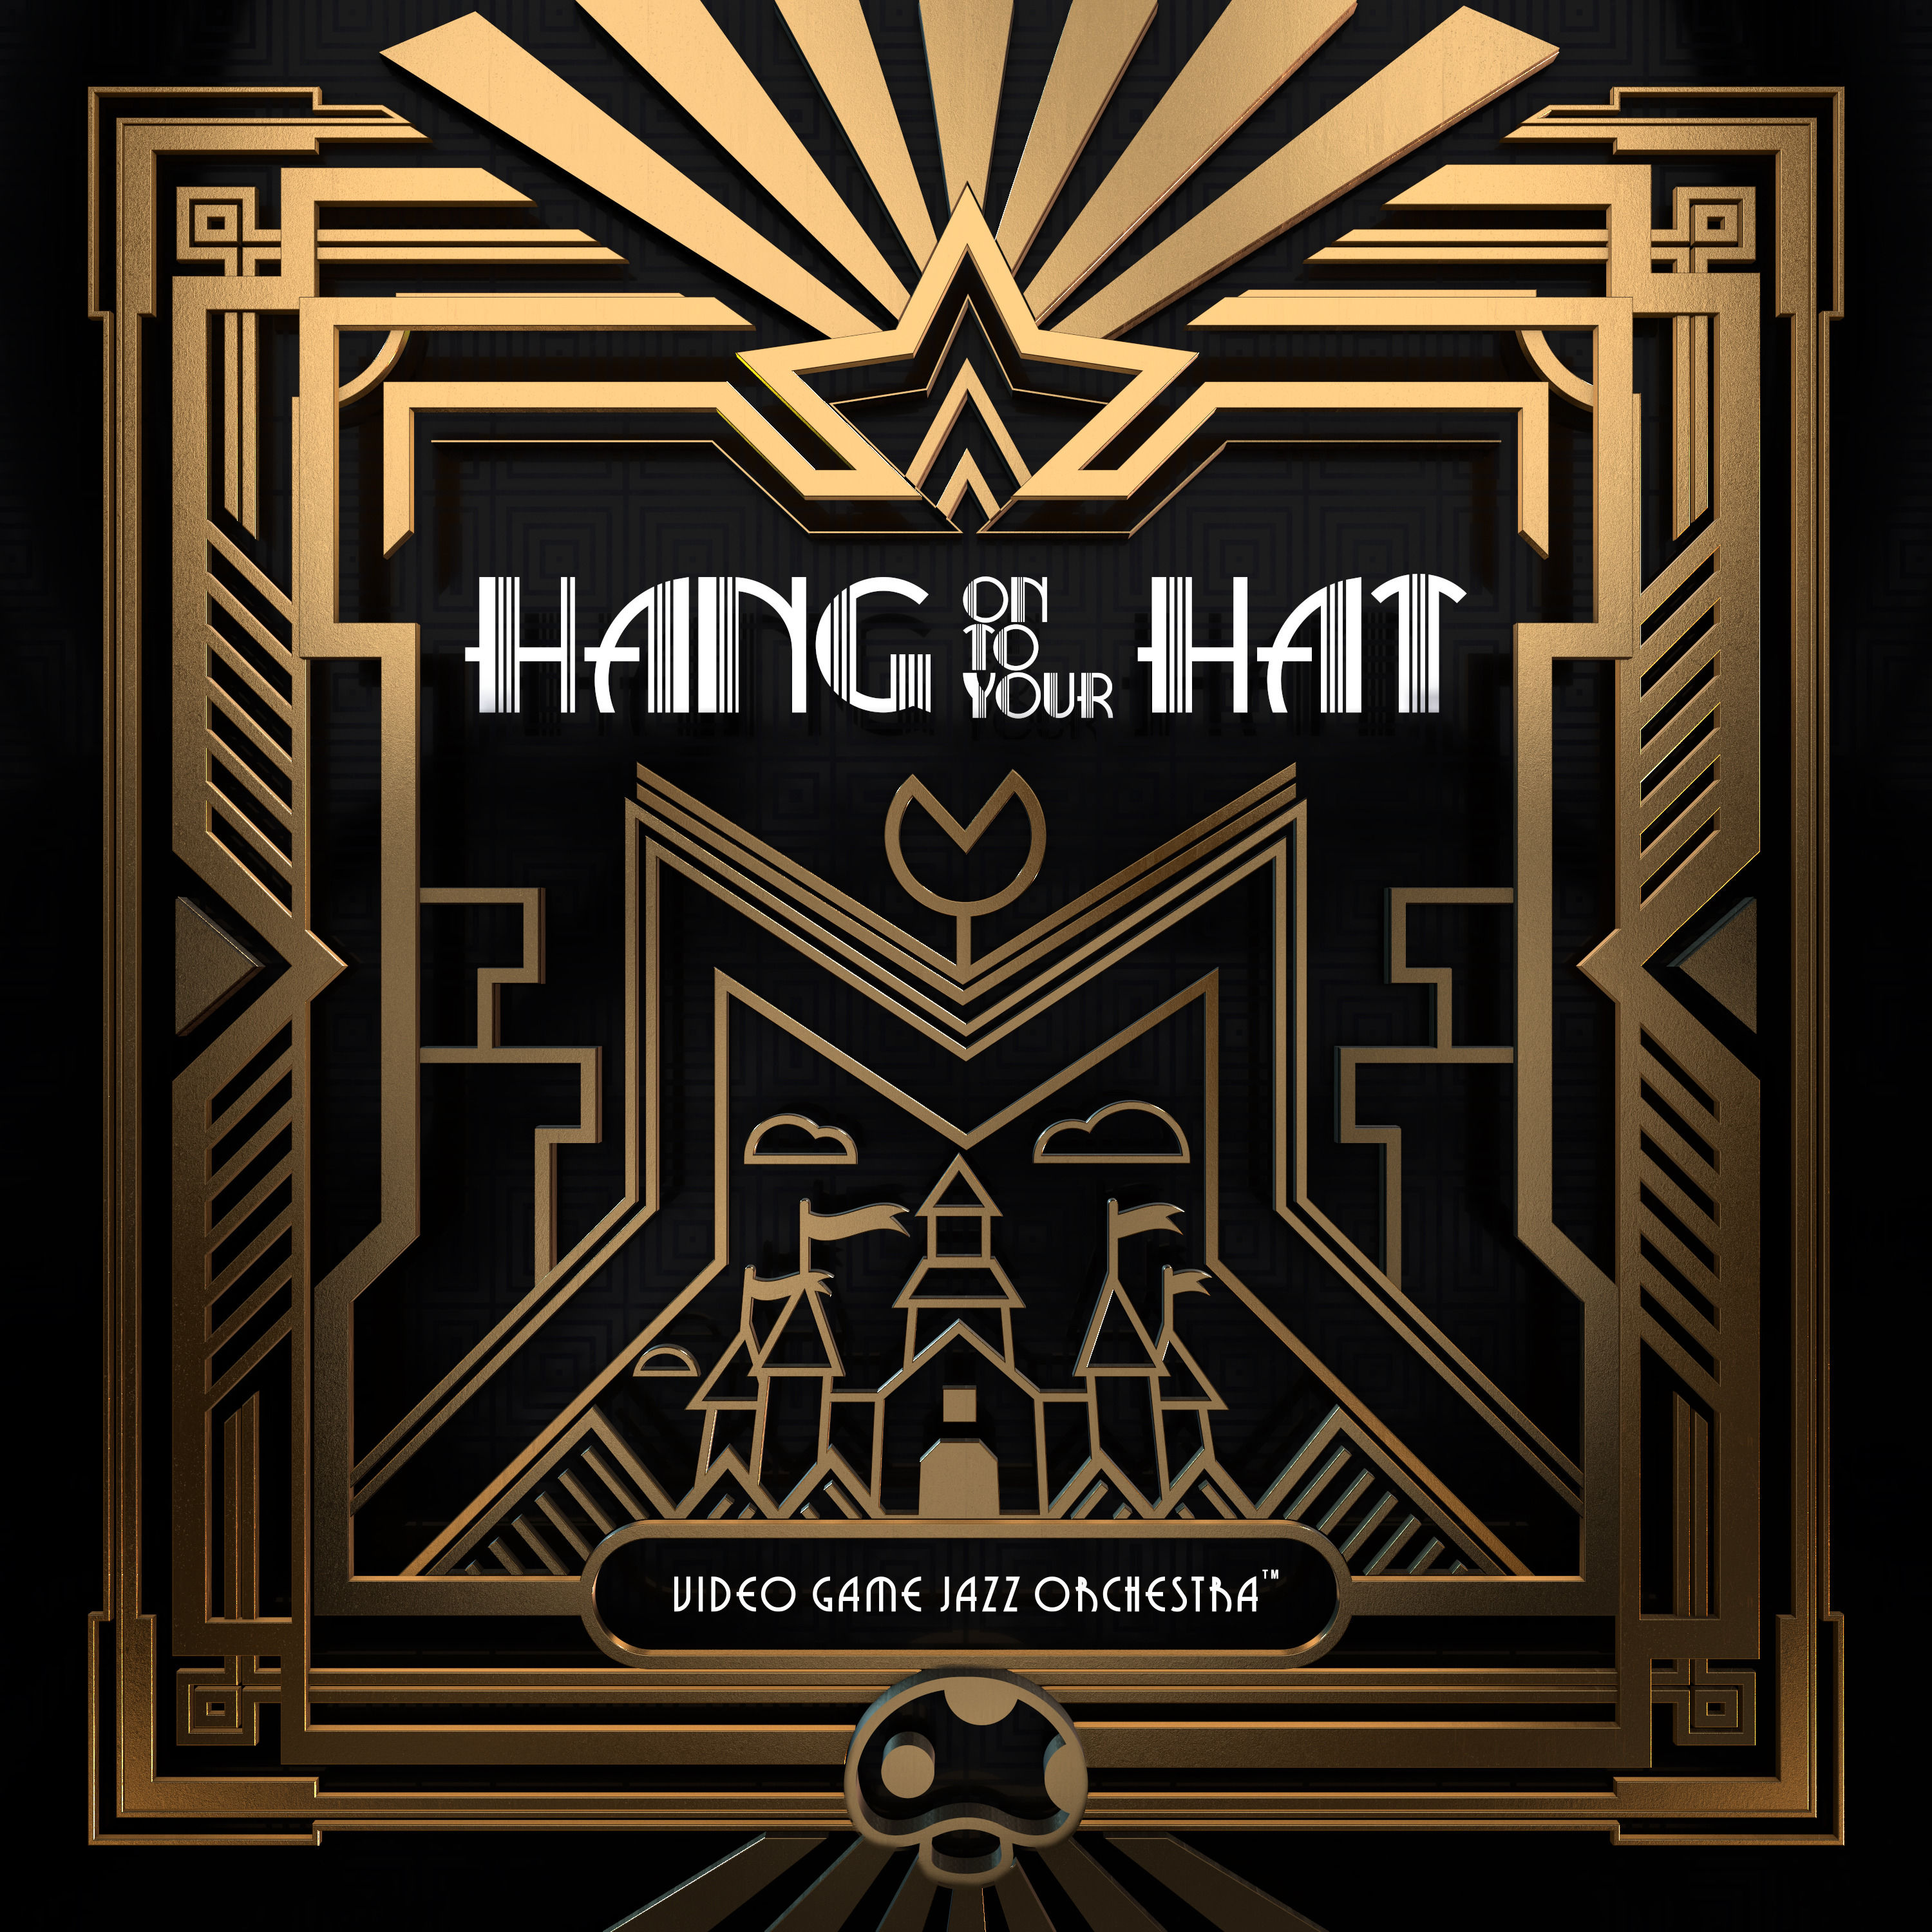 Video Game Jazz Orchestra – Hang on to Your Hat (2020) [FLAC 24bit/44,1kHz]